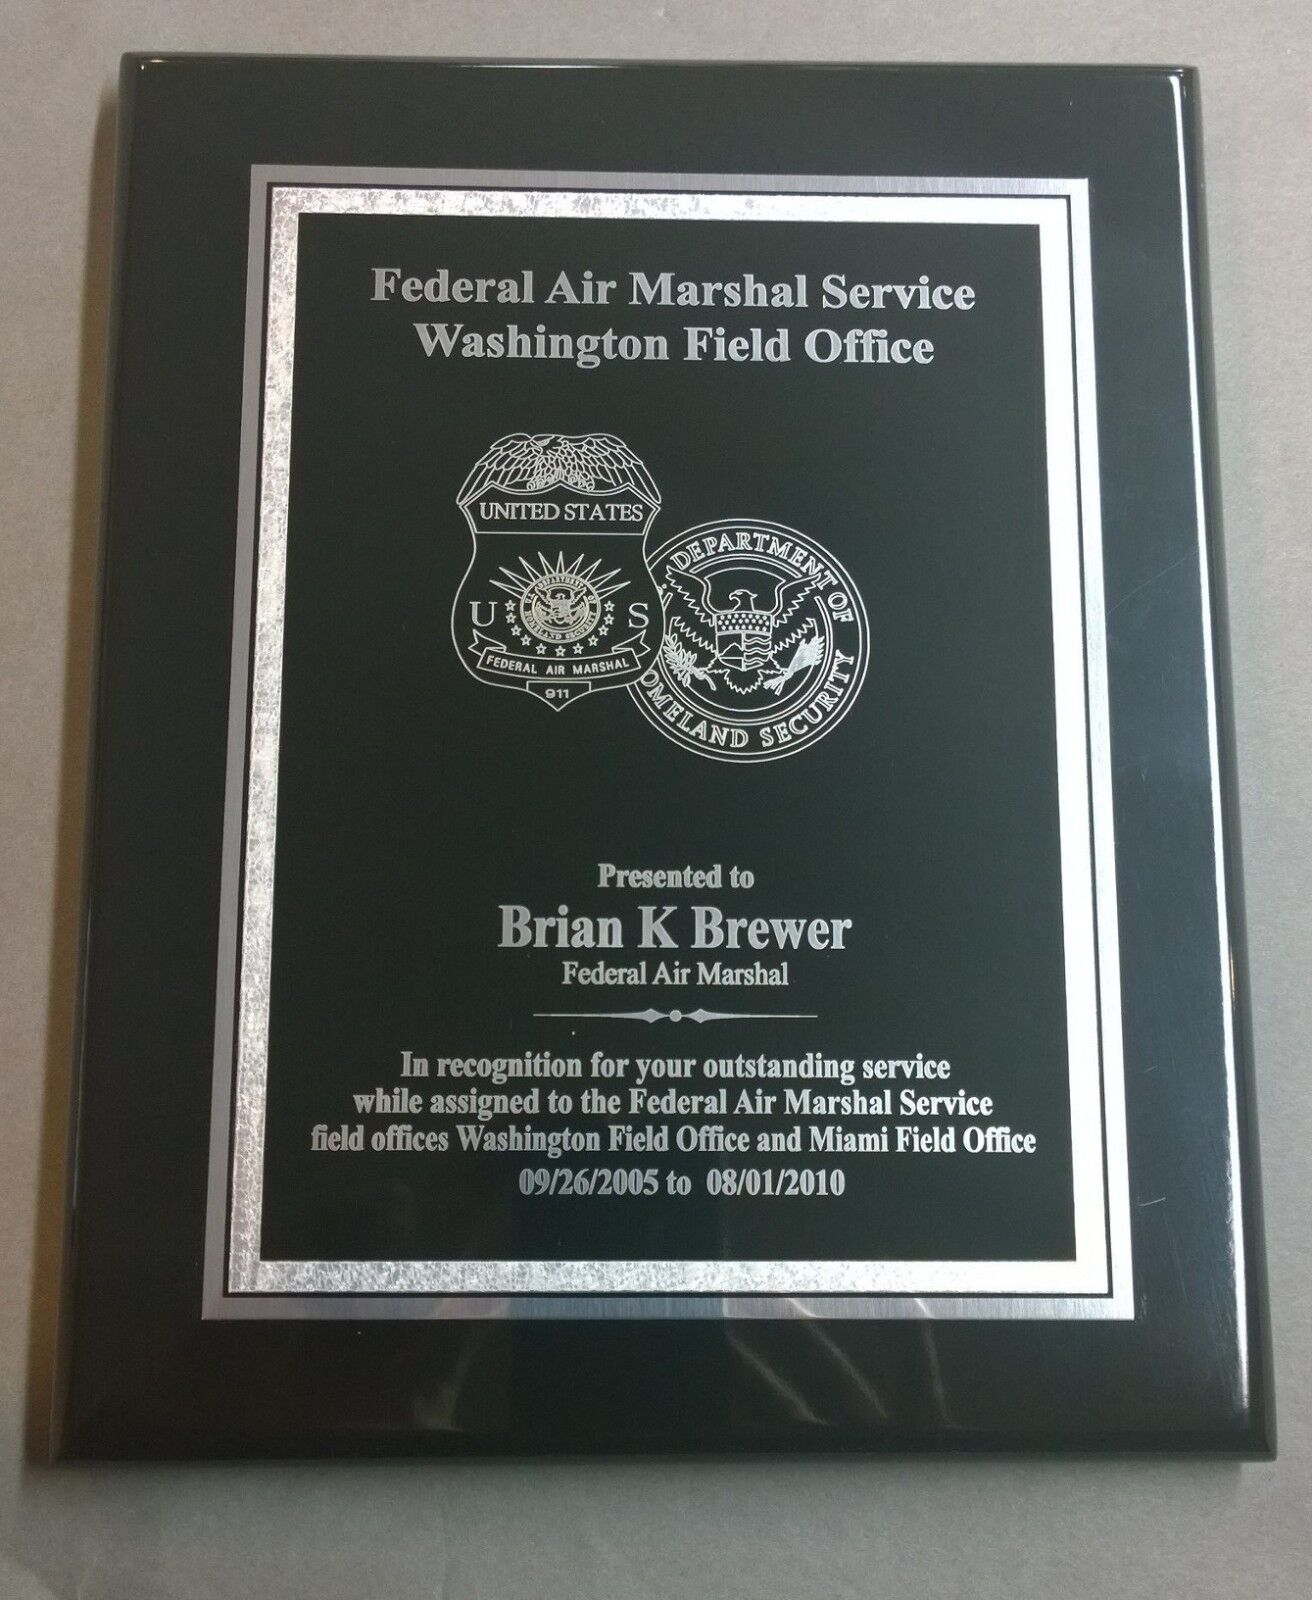 Federal Air Marshal Service Plaque Recognition Award 